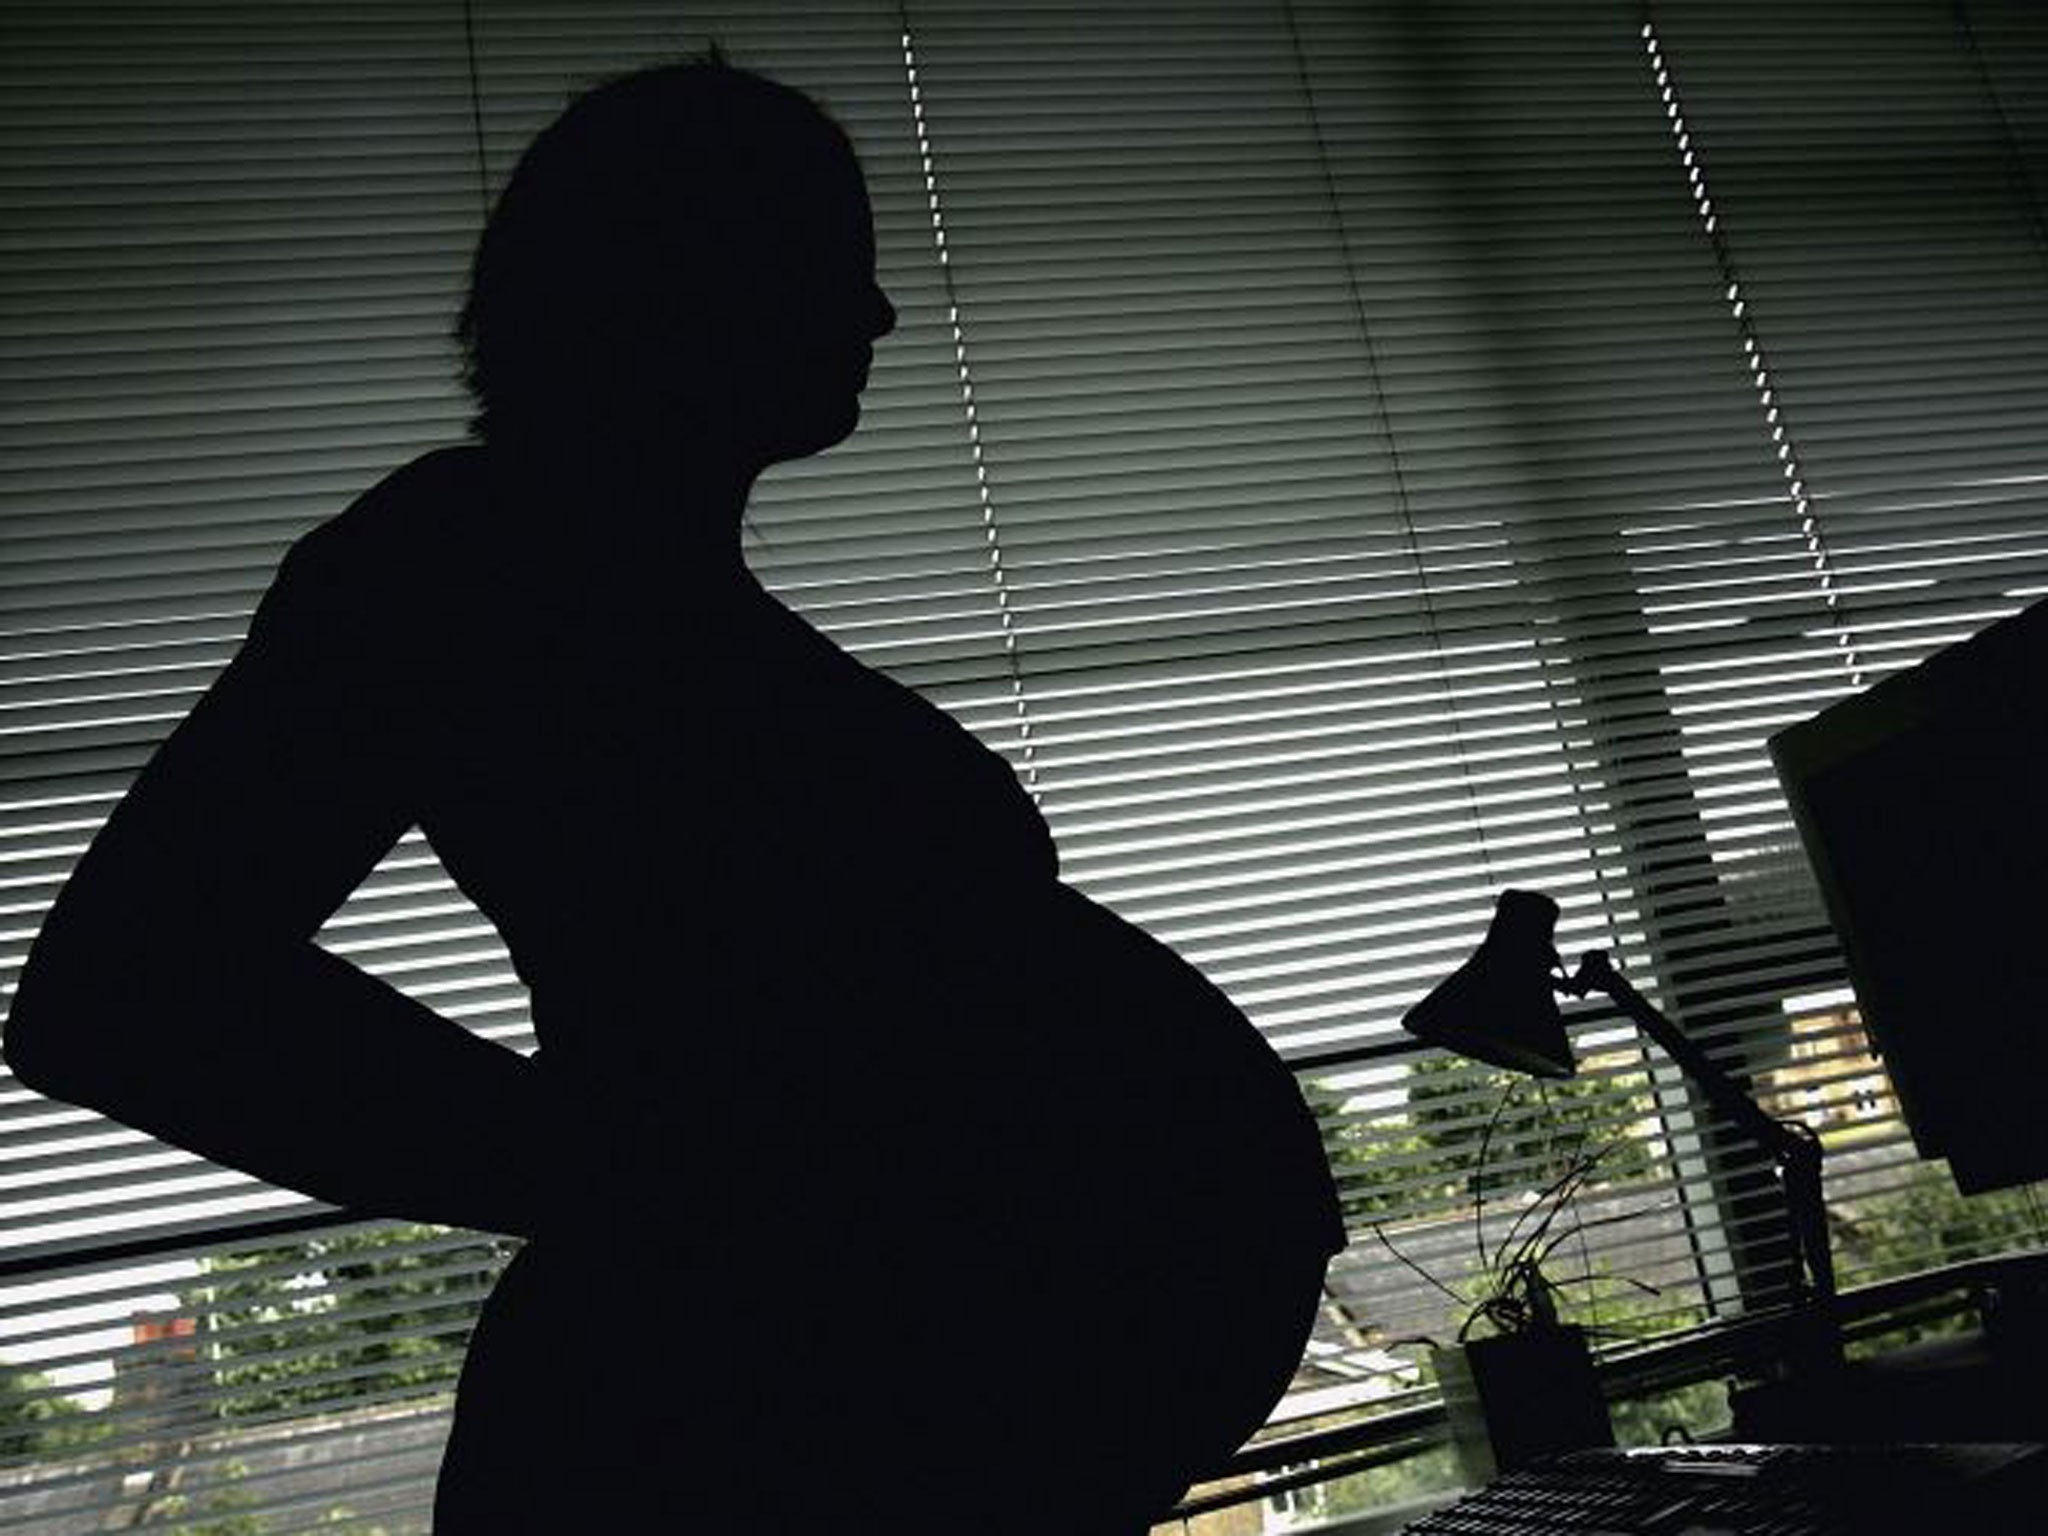 Since 2008, as many as 250,000 women have been forced out of their job simply for being pregnant or taking maternity leave